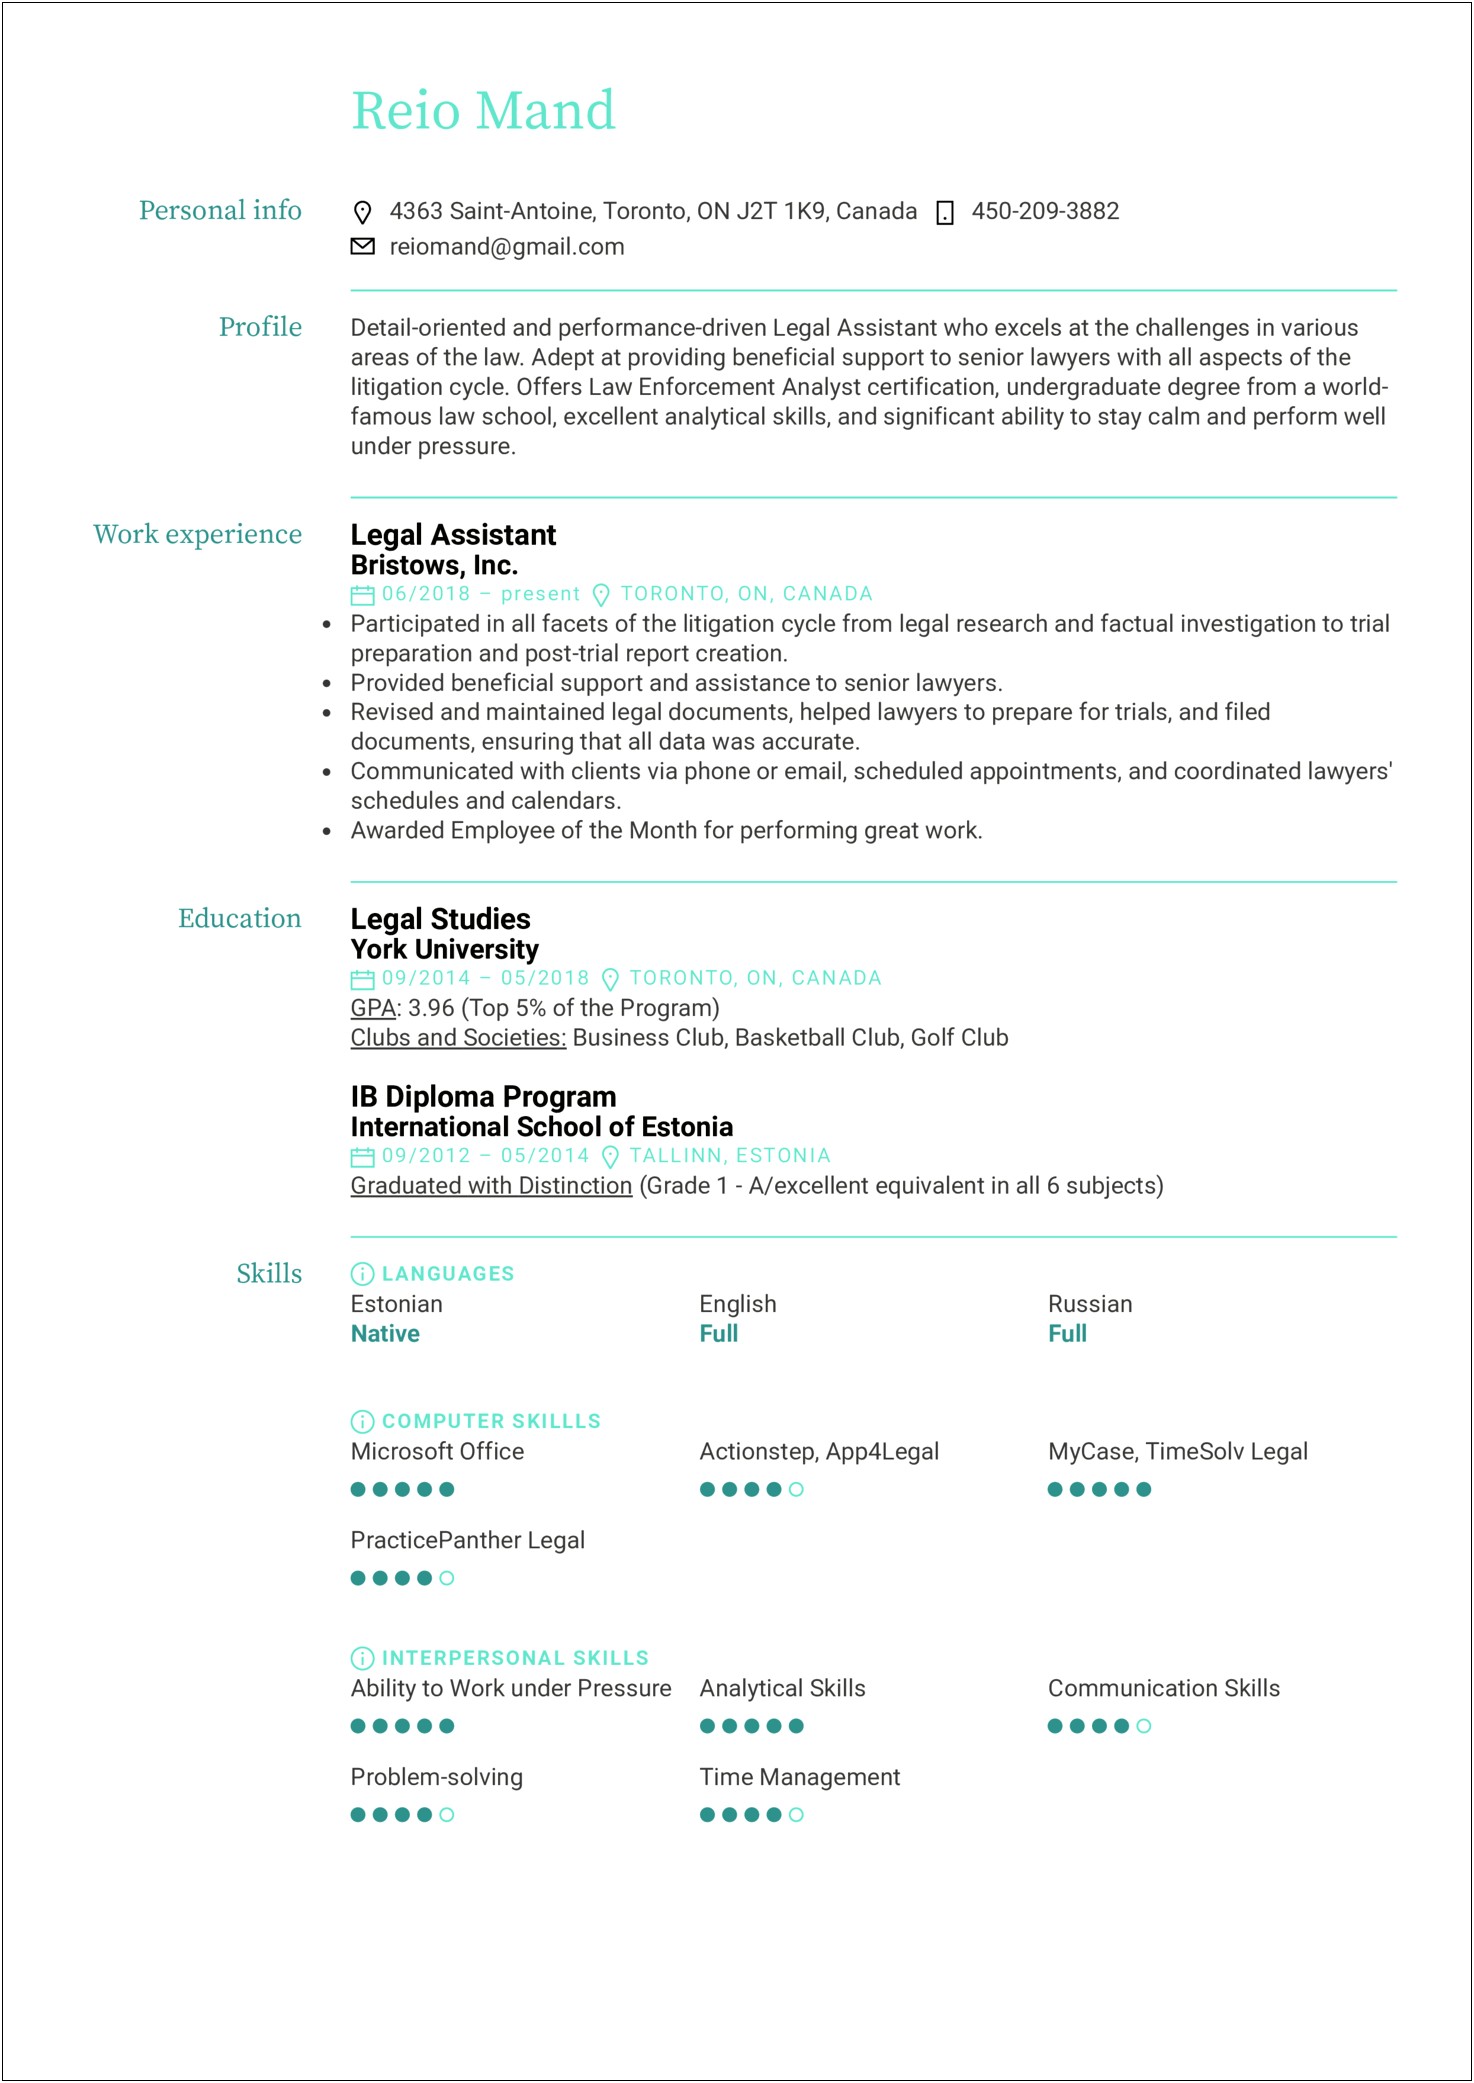 Aministrative Skills For Paralegal Resume